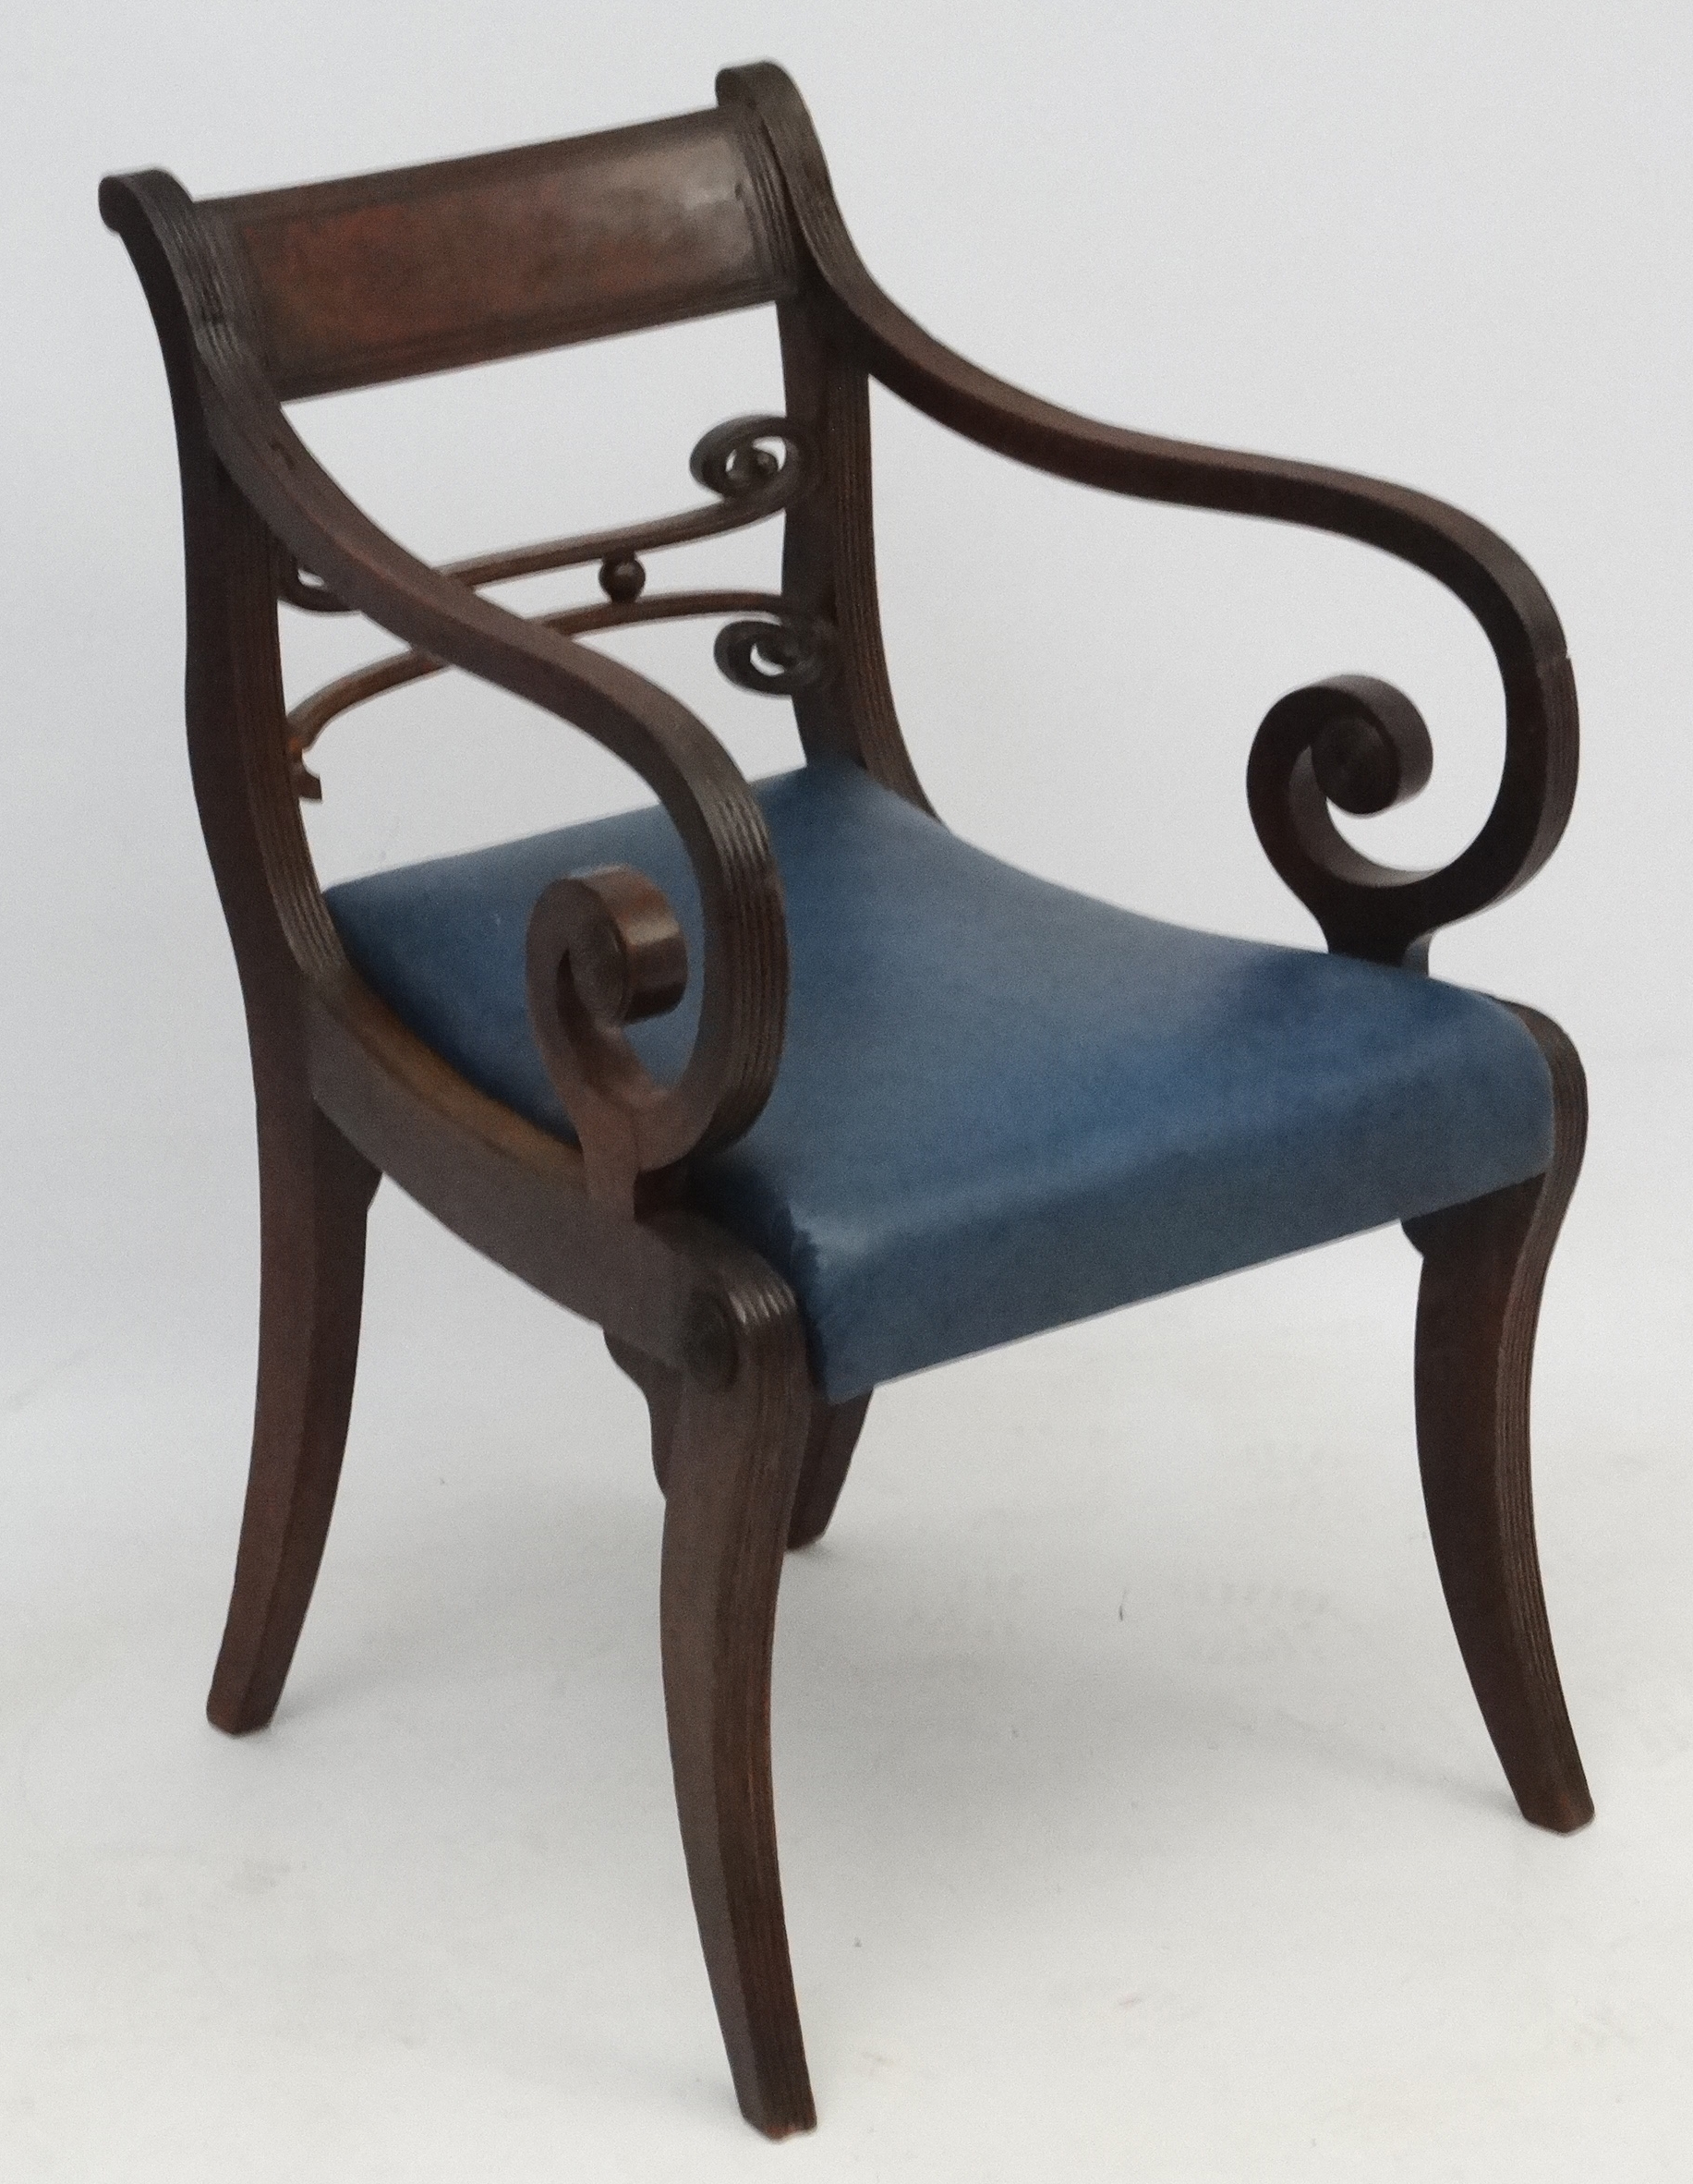 A Regency mahogany open arm / carver chair with sabre legs and drop in seats 32 1/2" high - Image 2 of 5